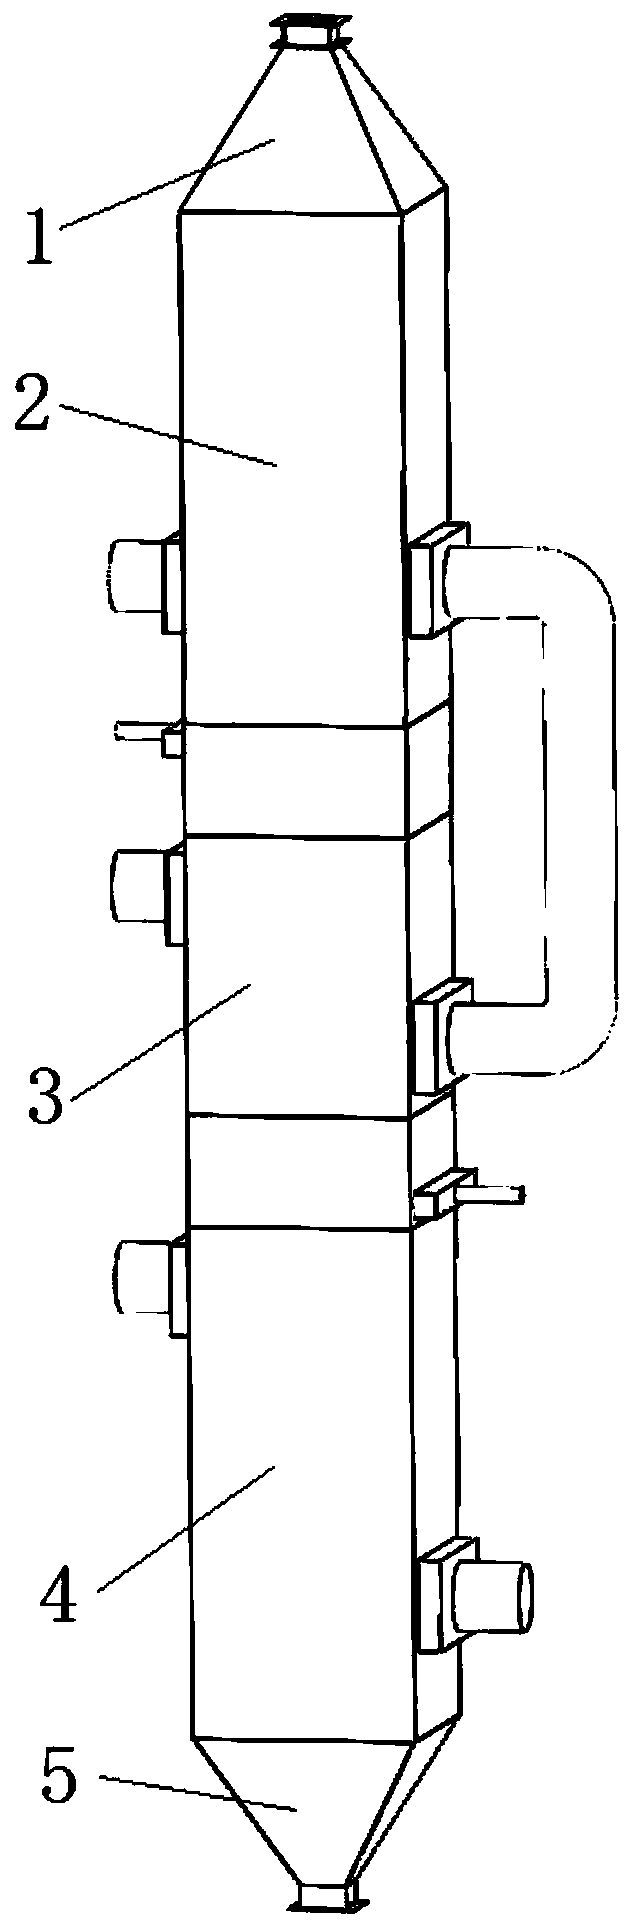 Carbon-based catalyst regeneration device and process